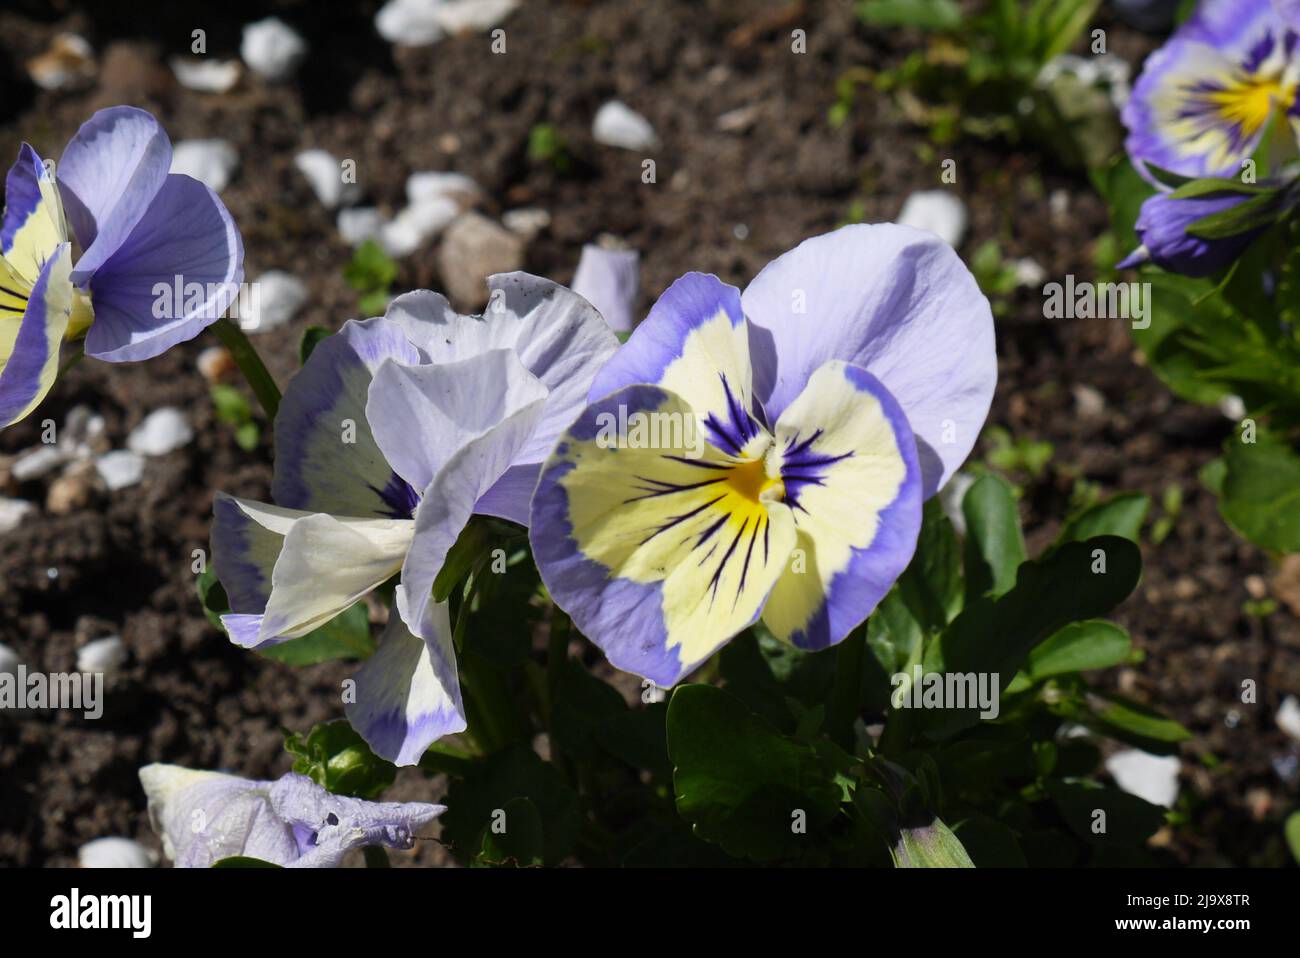 Pansies growing on the ground Stock Photo